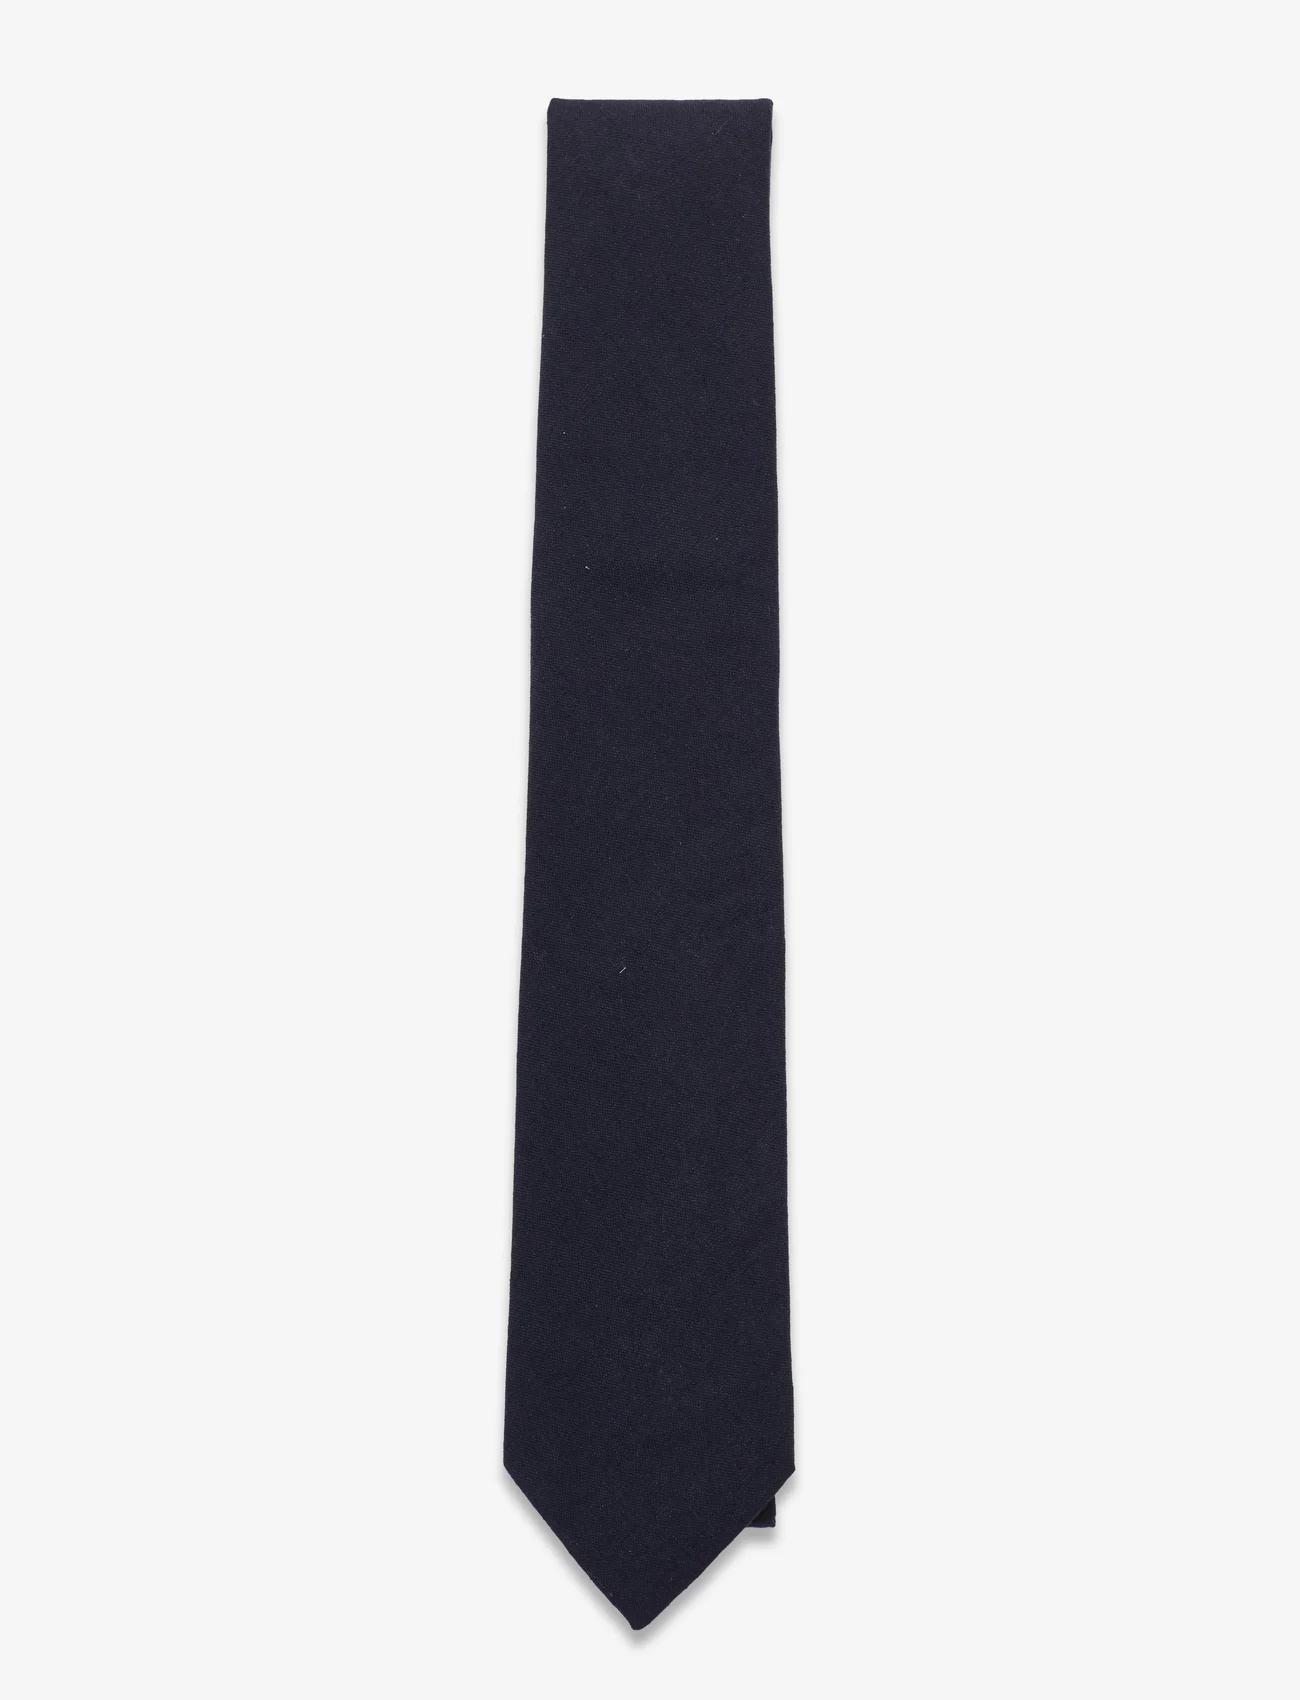 AN IVY - Solid Navy Cotton Tie - solmiot - navy - 0